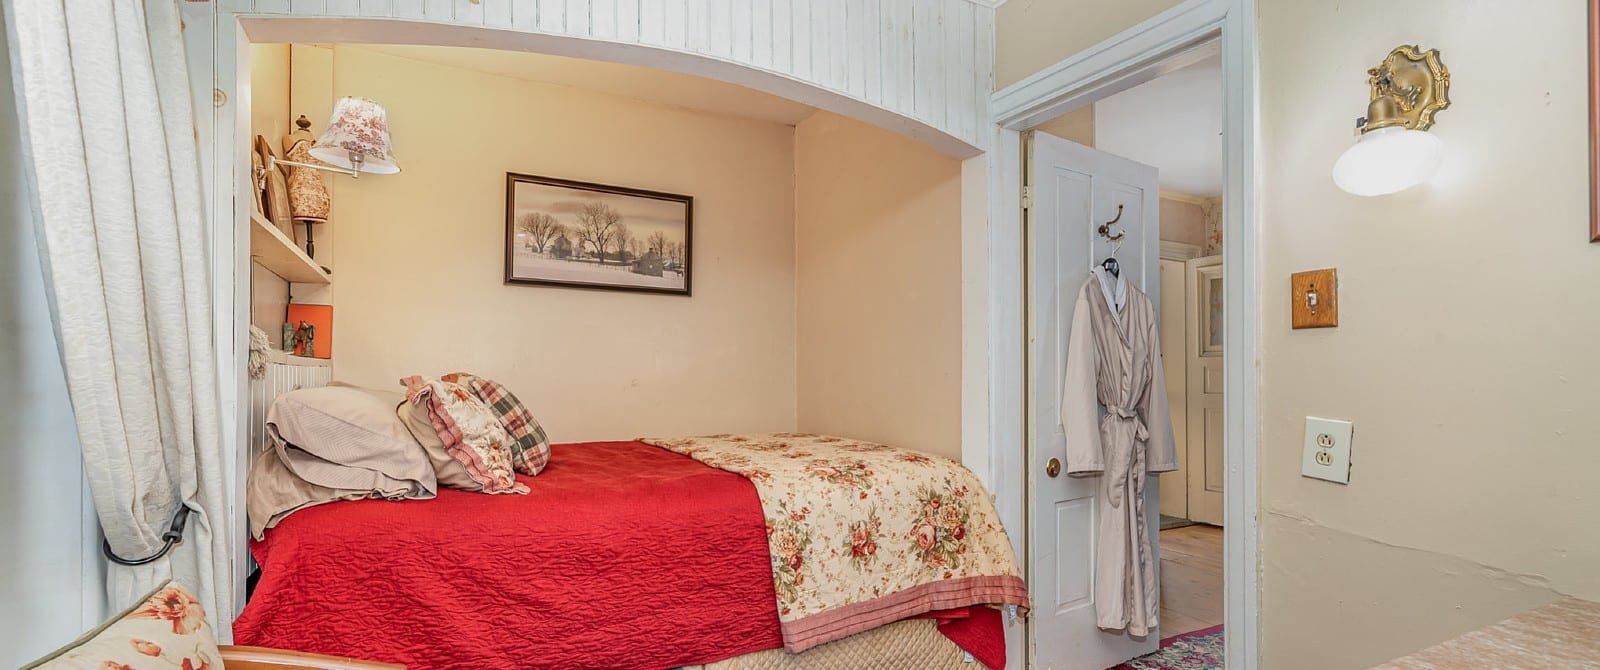 Bedroom with queen bed in a small nook with doorway open to a bathroom with a robe hanging on a hook